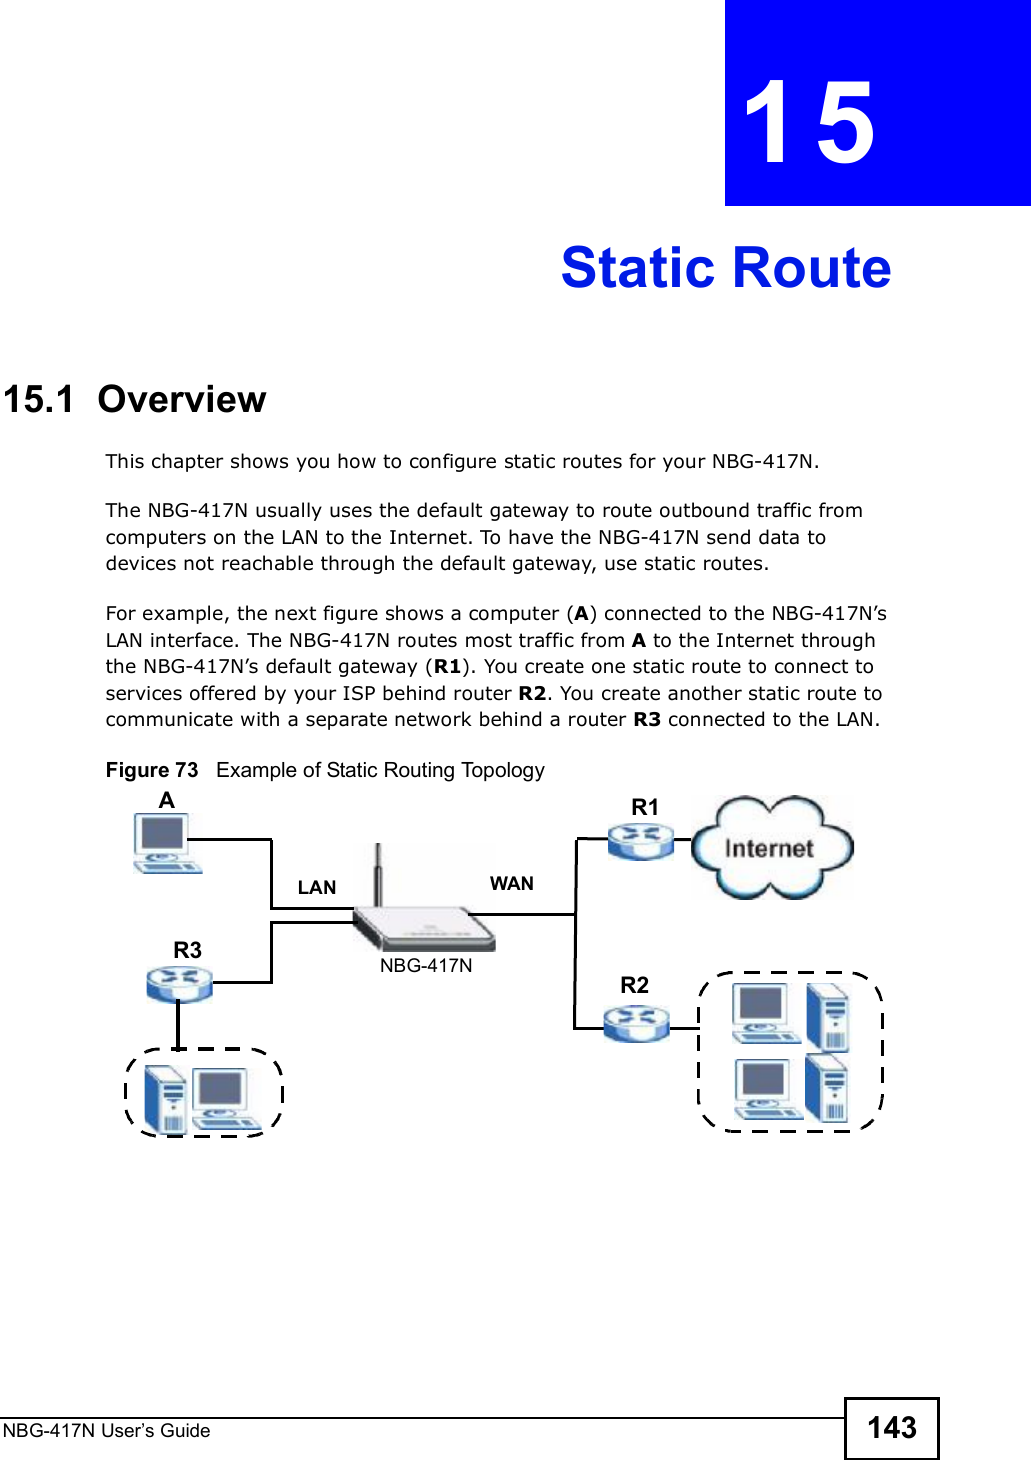 NBG-417N User s Guide 143CHAPTER  15 Static Route15.1  OverviewThis chapter shows you how to configure static routes for your NBG-417N.The NBG-417N usually uses the default gateway to route outbound traffic from computers on the LAN to the Internet. To have the NBG-417N send data to devices not reachable through the default gateway, use static routes.For example, the next figure shows a computer (A) connected to the NBG-417N!s LAN interface. The NBG-417N routes most traffic from A to the Internet through the NBG-417N!s default gateway (R1). You create one static route to connect to services offered by your ISP behind router R2. You create another static route to communicate with a separate network behind a router R3 connected to the LAN.Figure 73   Example of Static Routing TopologyWANR1R2AR3LANNBG-417N